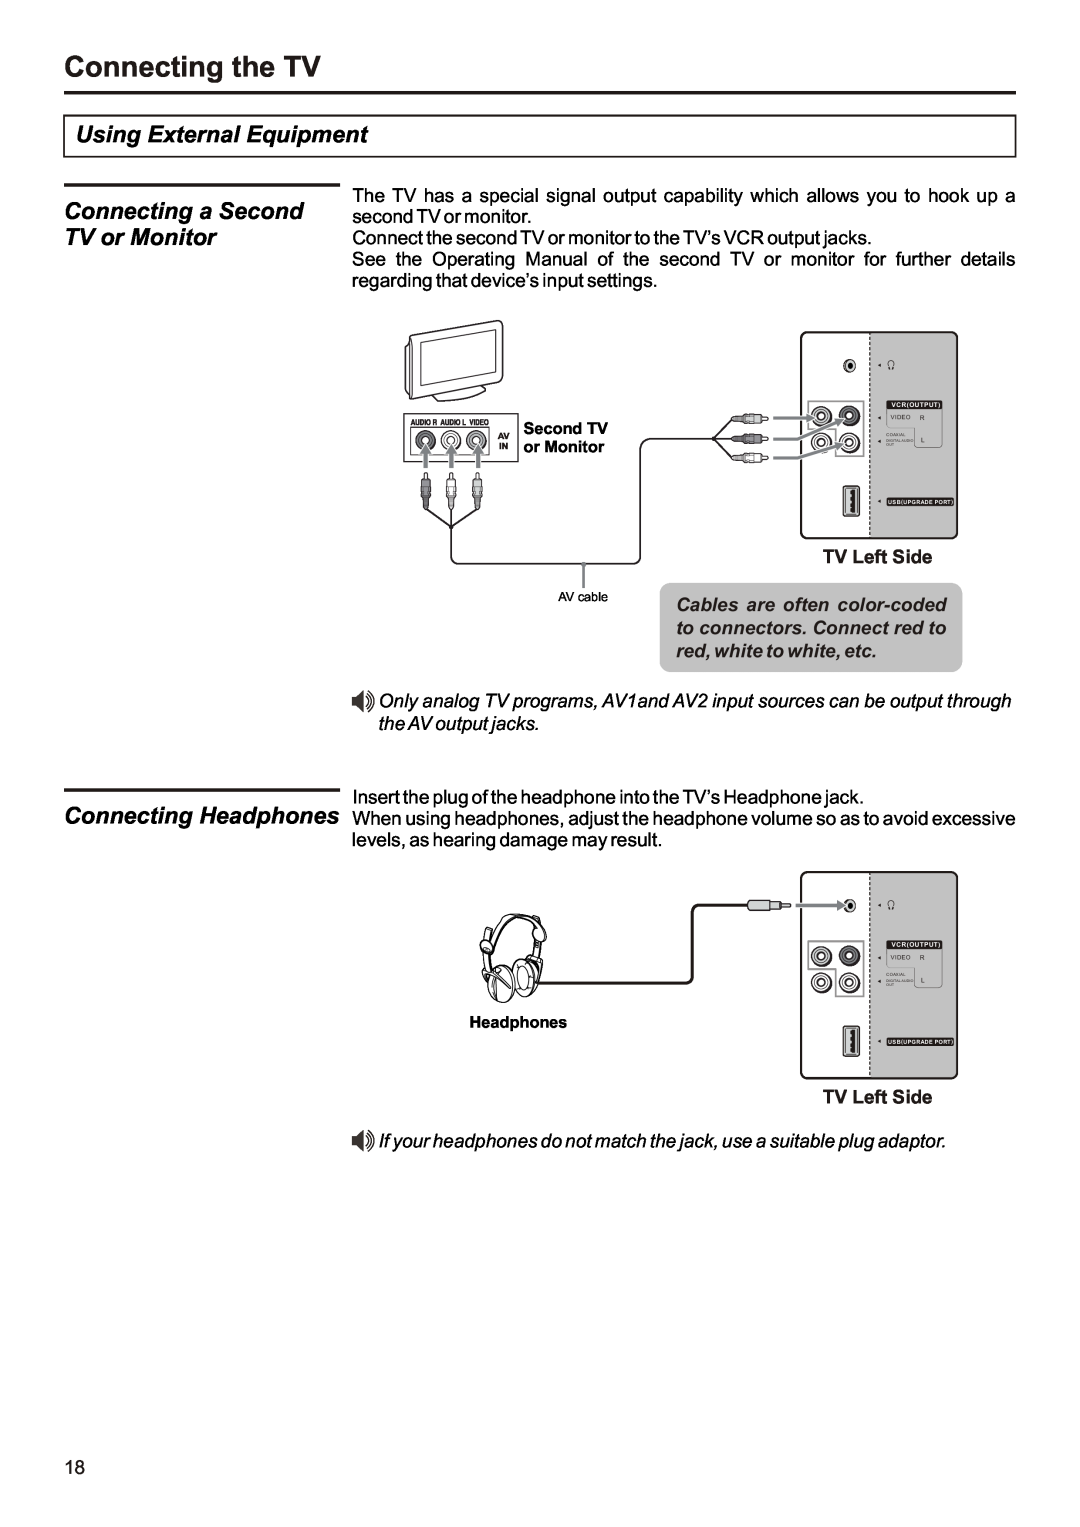 Audiovox FPE3207 operation manual Connecting a Second TV or Monitor, Connecting the TV, Using External Equipment 